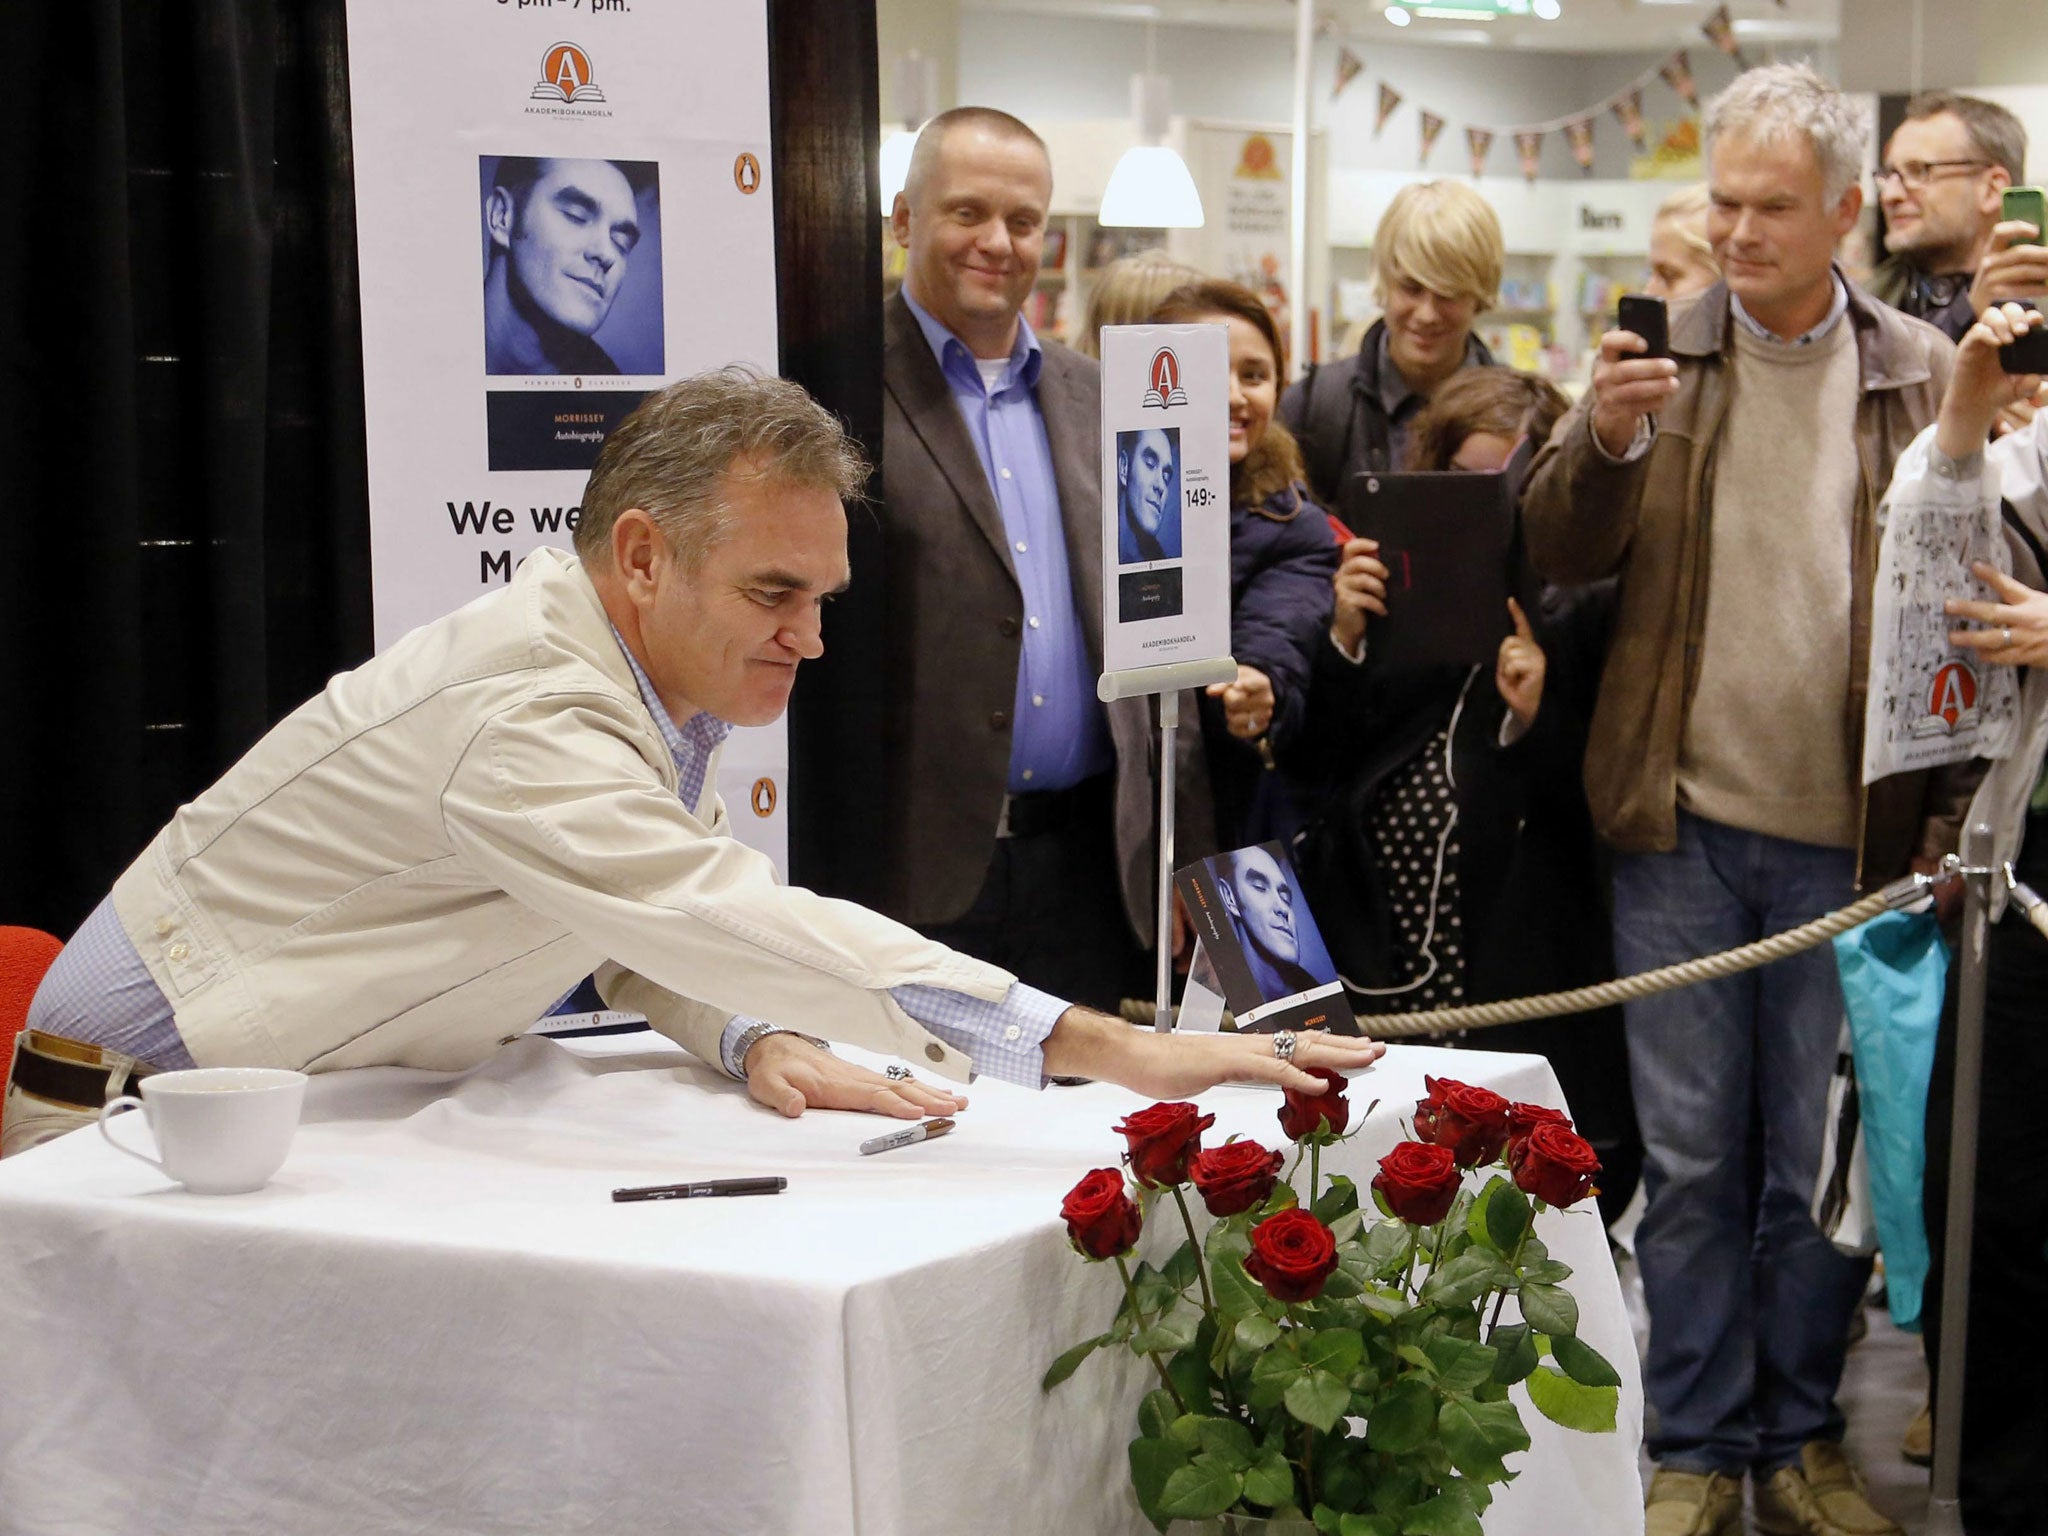 Morrissey at a book-signing